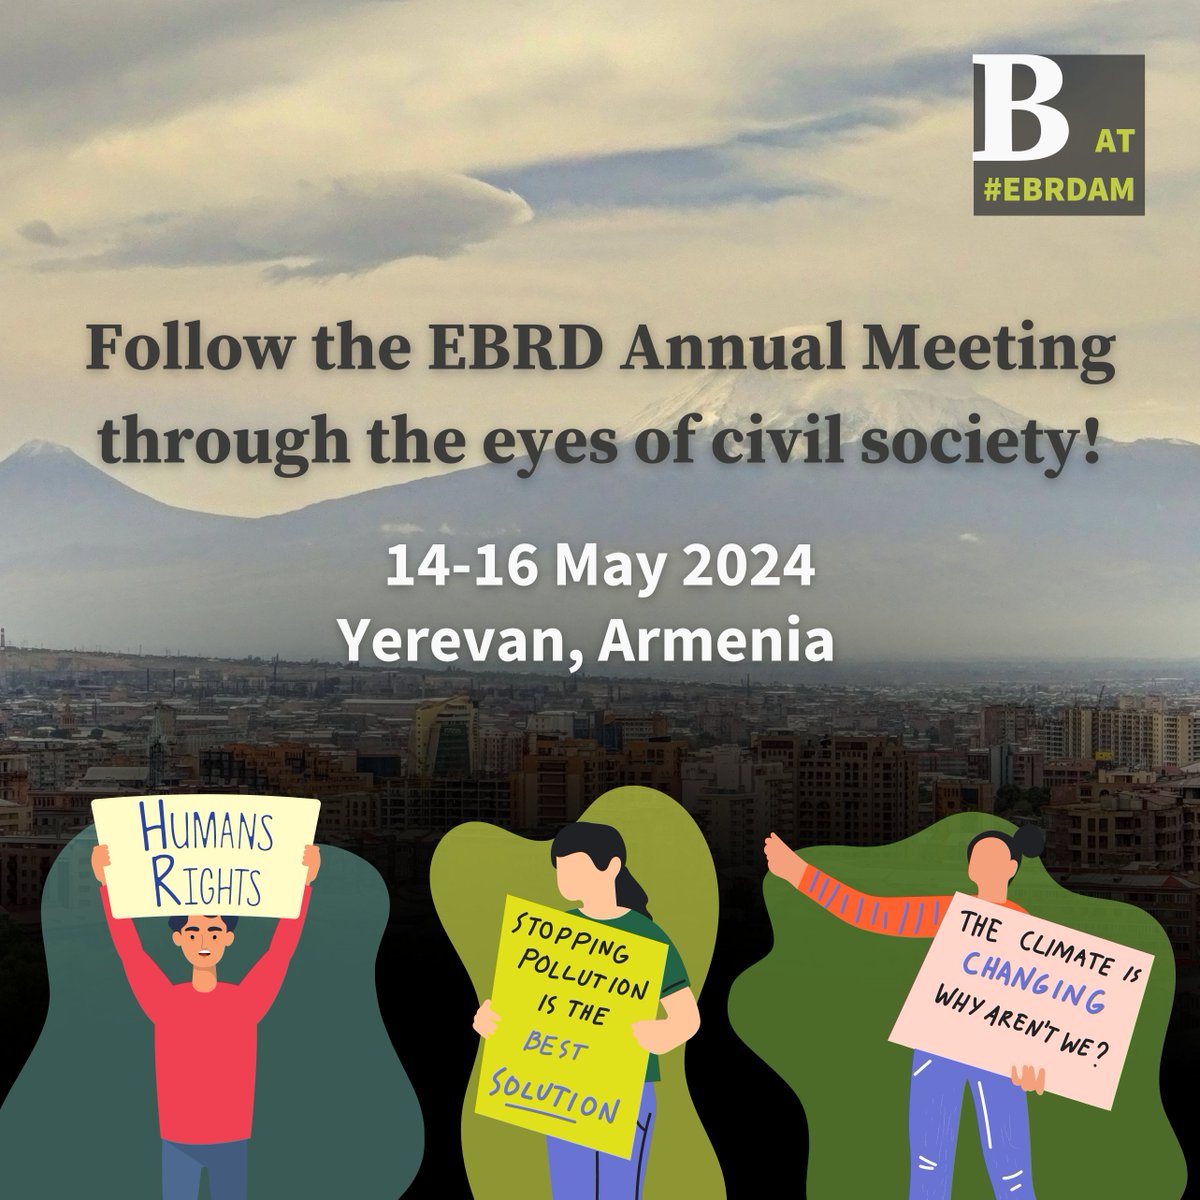 We’re getting ready for the @EBRD Annual Meeting!
📢This year, we’re calling on the #EBRD to #StandUpForHumanRights as it revises its good governance policies. We’ll also be raising issues with EBRD investments in agribusiness, cities & energy.
👉bankwatch.org/ebrd-annual-me… #EBRDam